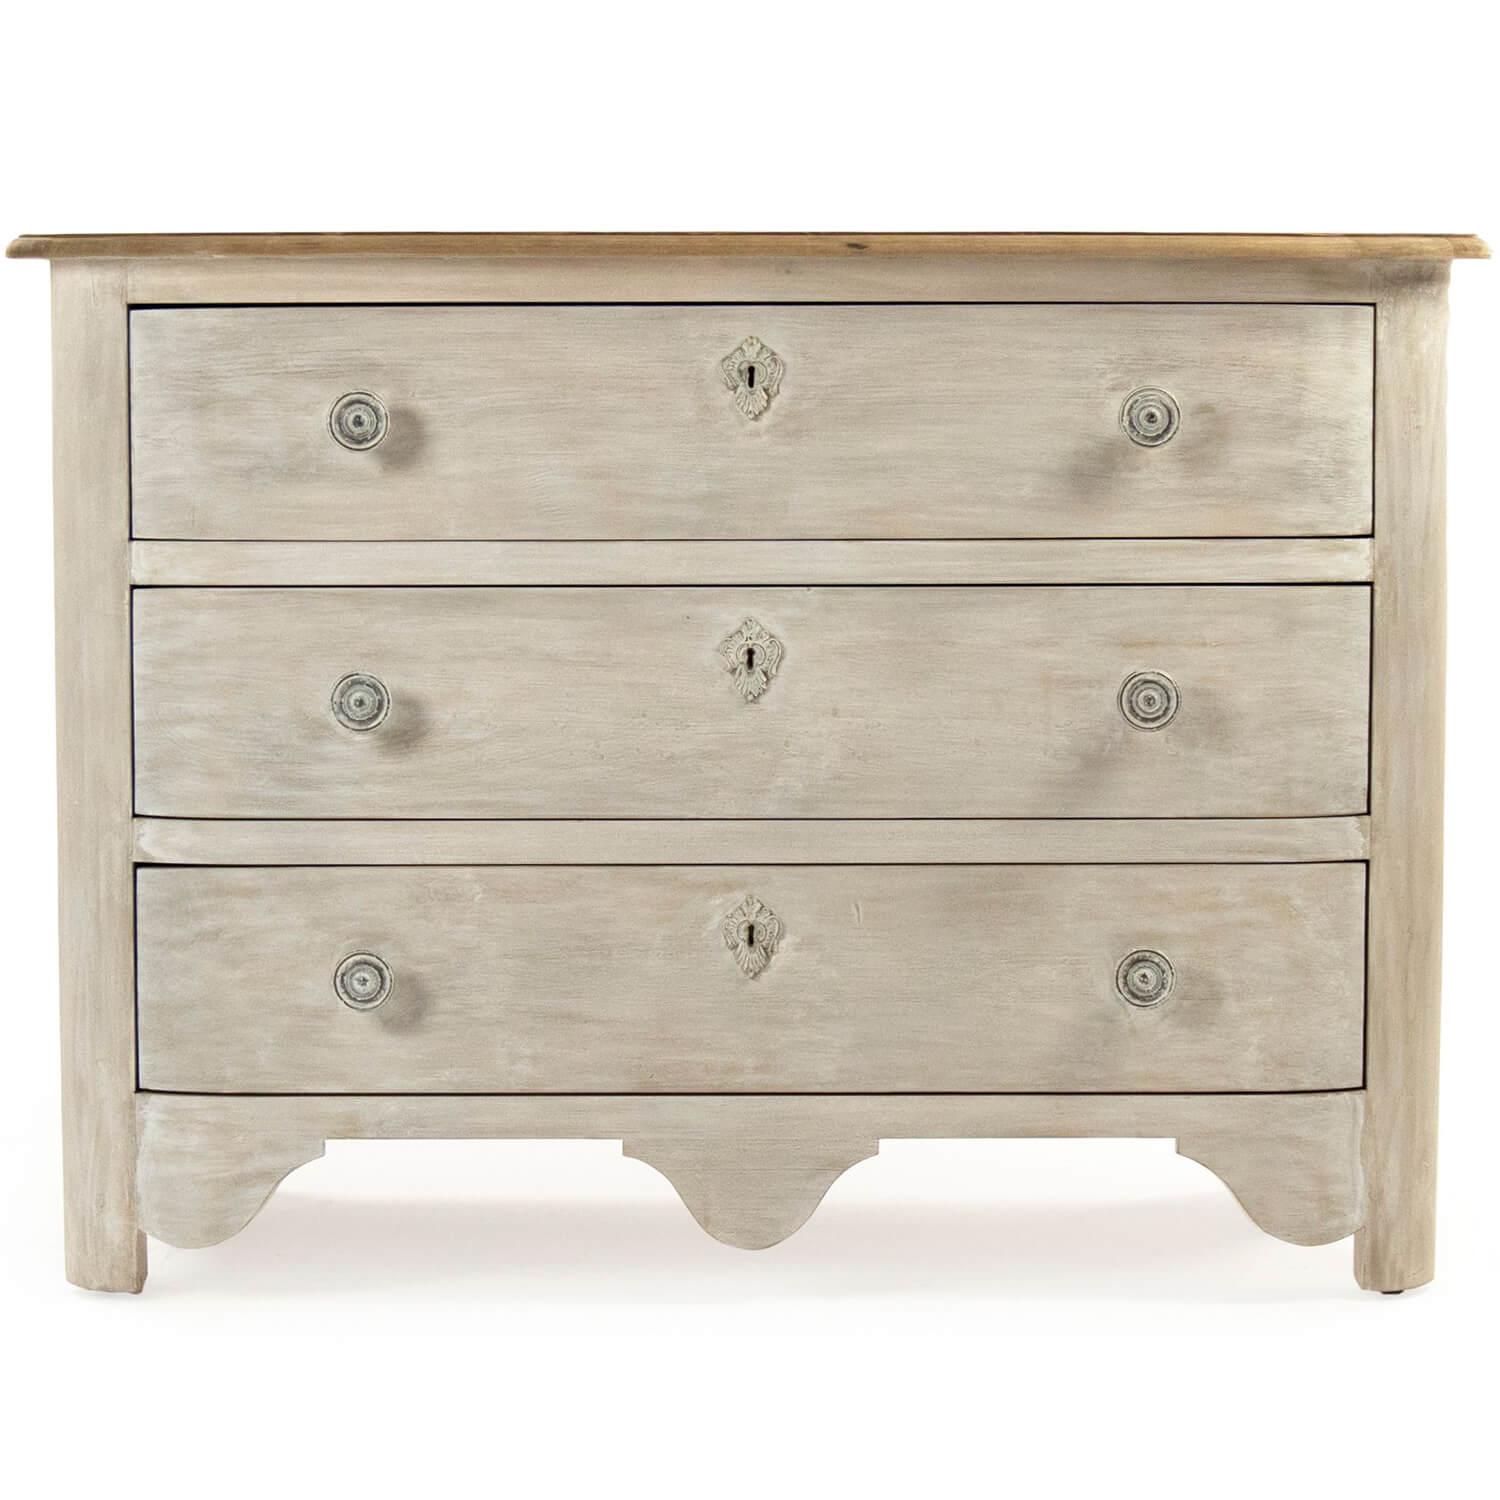 Wood Top Cream French Country Chest - Belle Escape